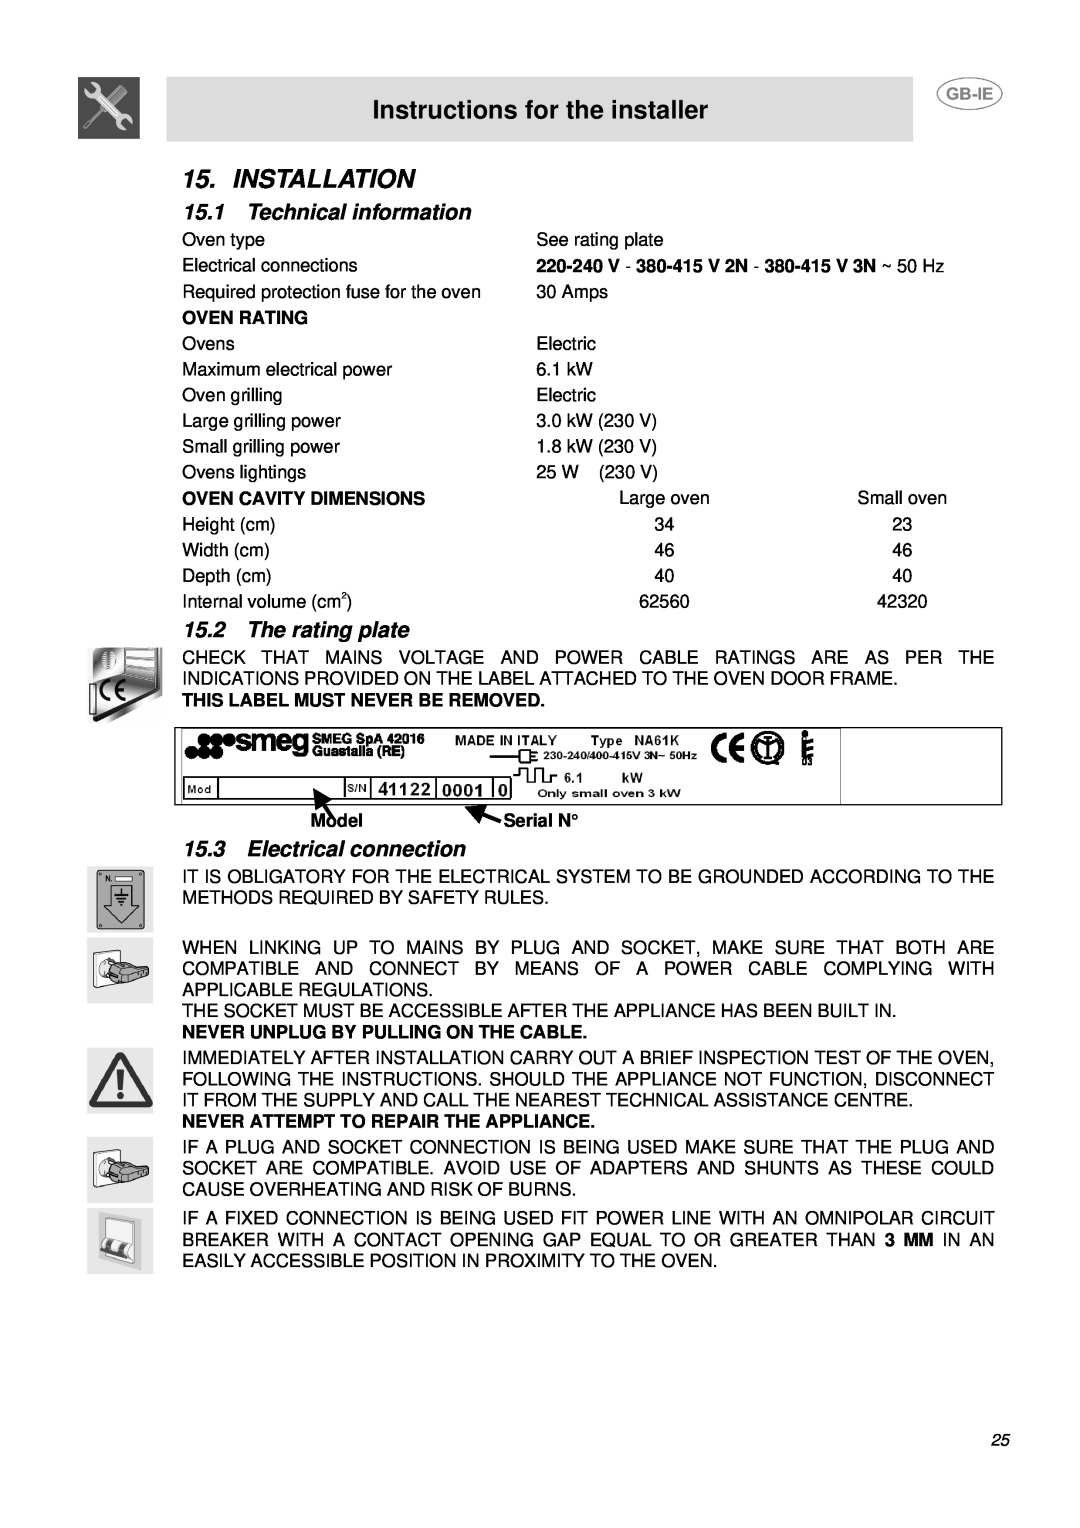 Smeg DUCO4SS Instructions for the installer, Installation, 15.1, Technical information, The rating plate, Oven Rating 